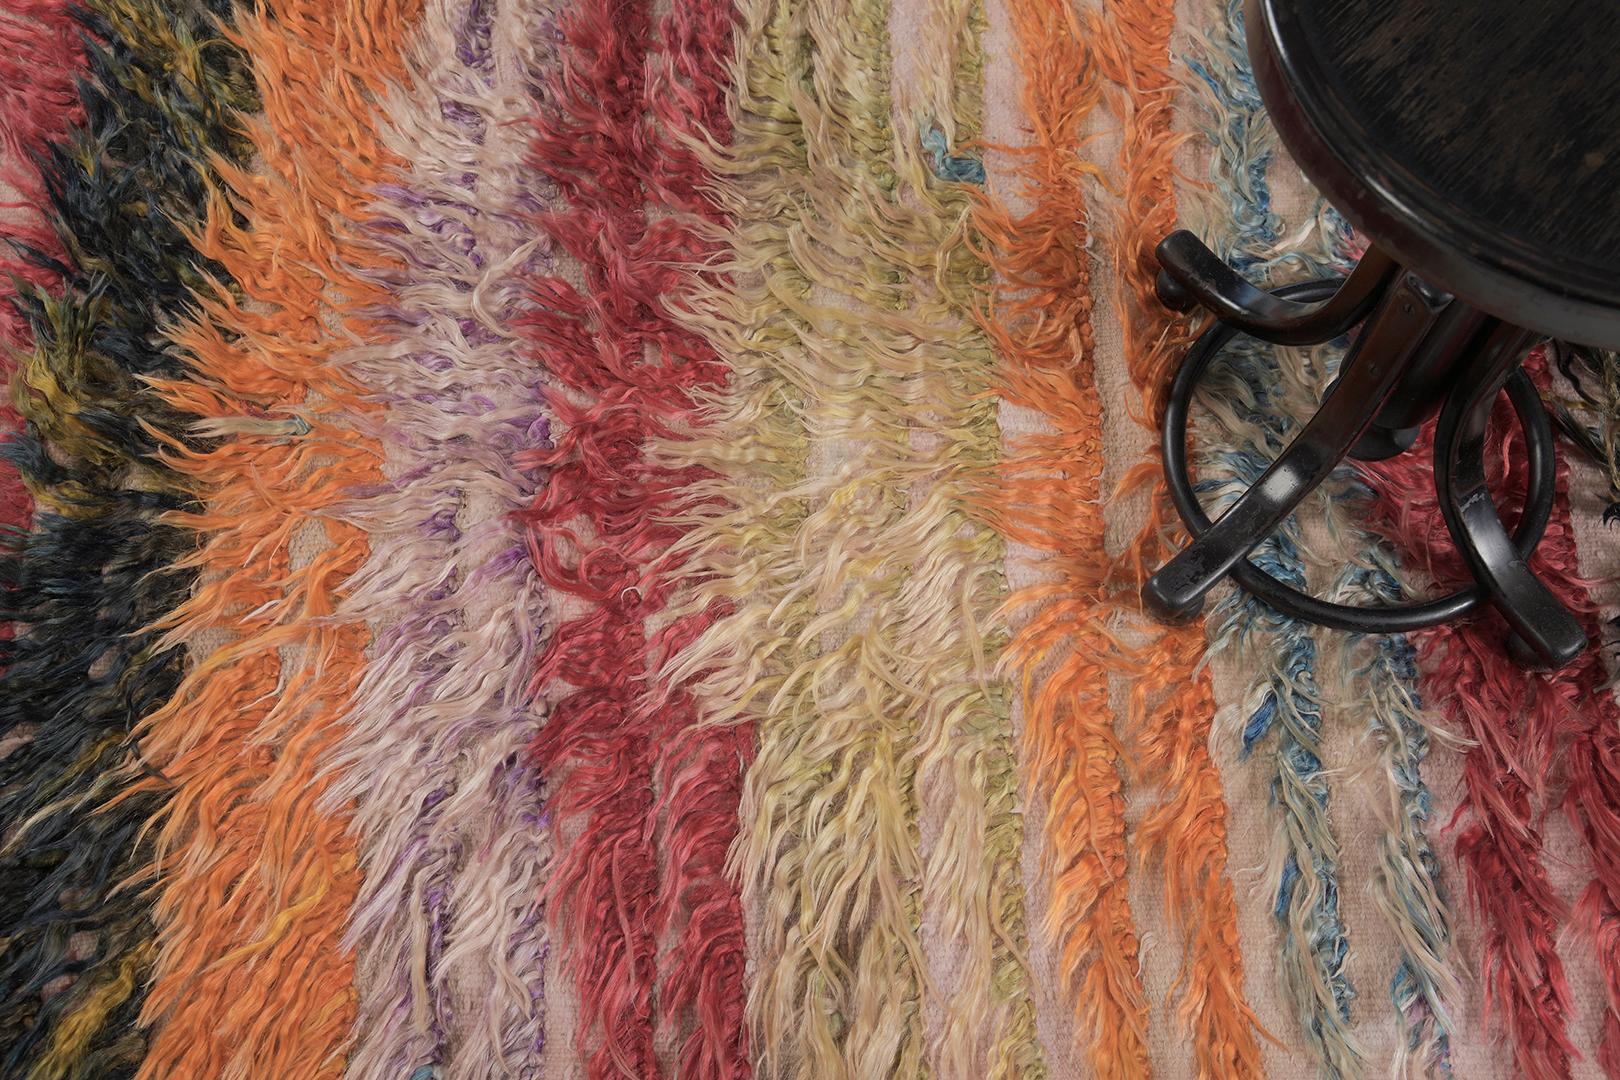 Tulu is a gorgeous wool shag that features amazing layers of variegated tones of rose, black, orange, purple, blue, and gold. It augments the stunning scenery and all will be loved by the next generation. Turkish Anatolian rugs weave together dyes